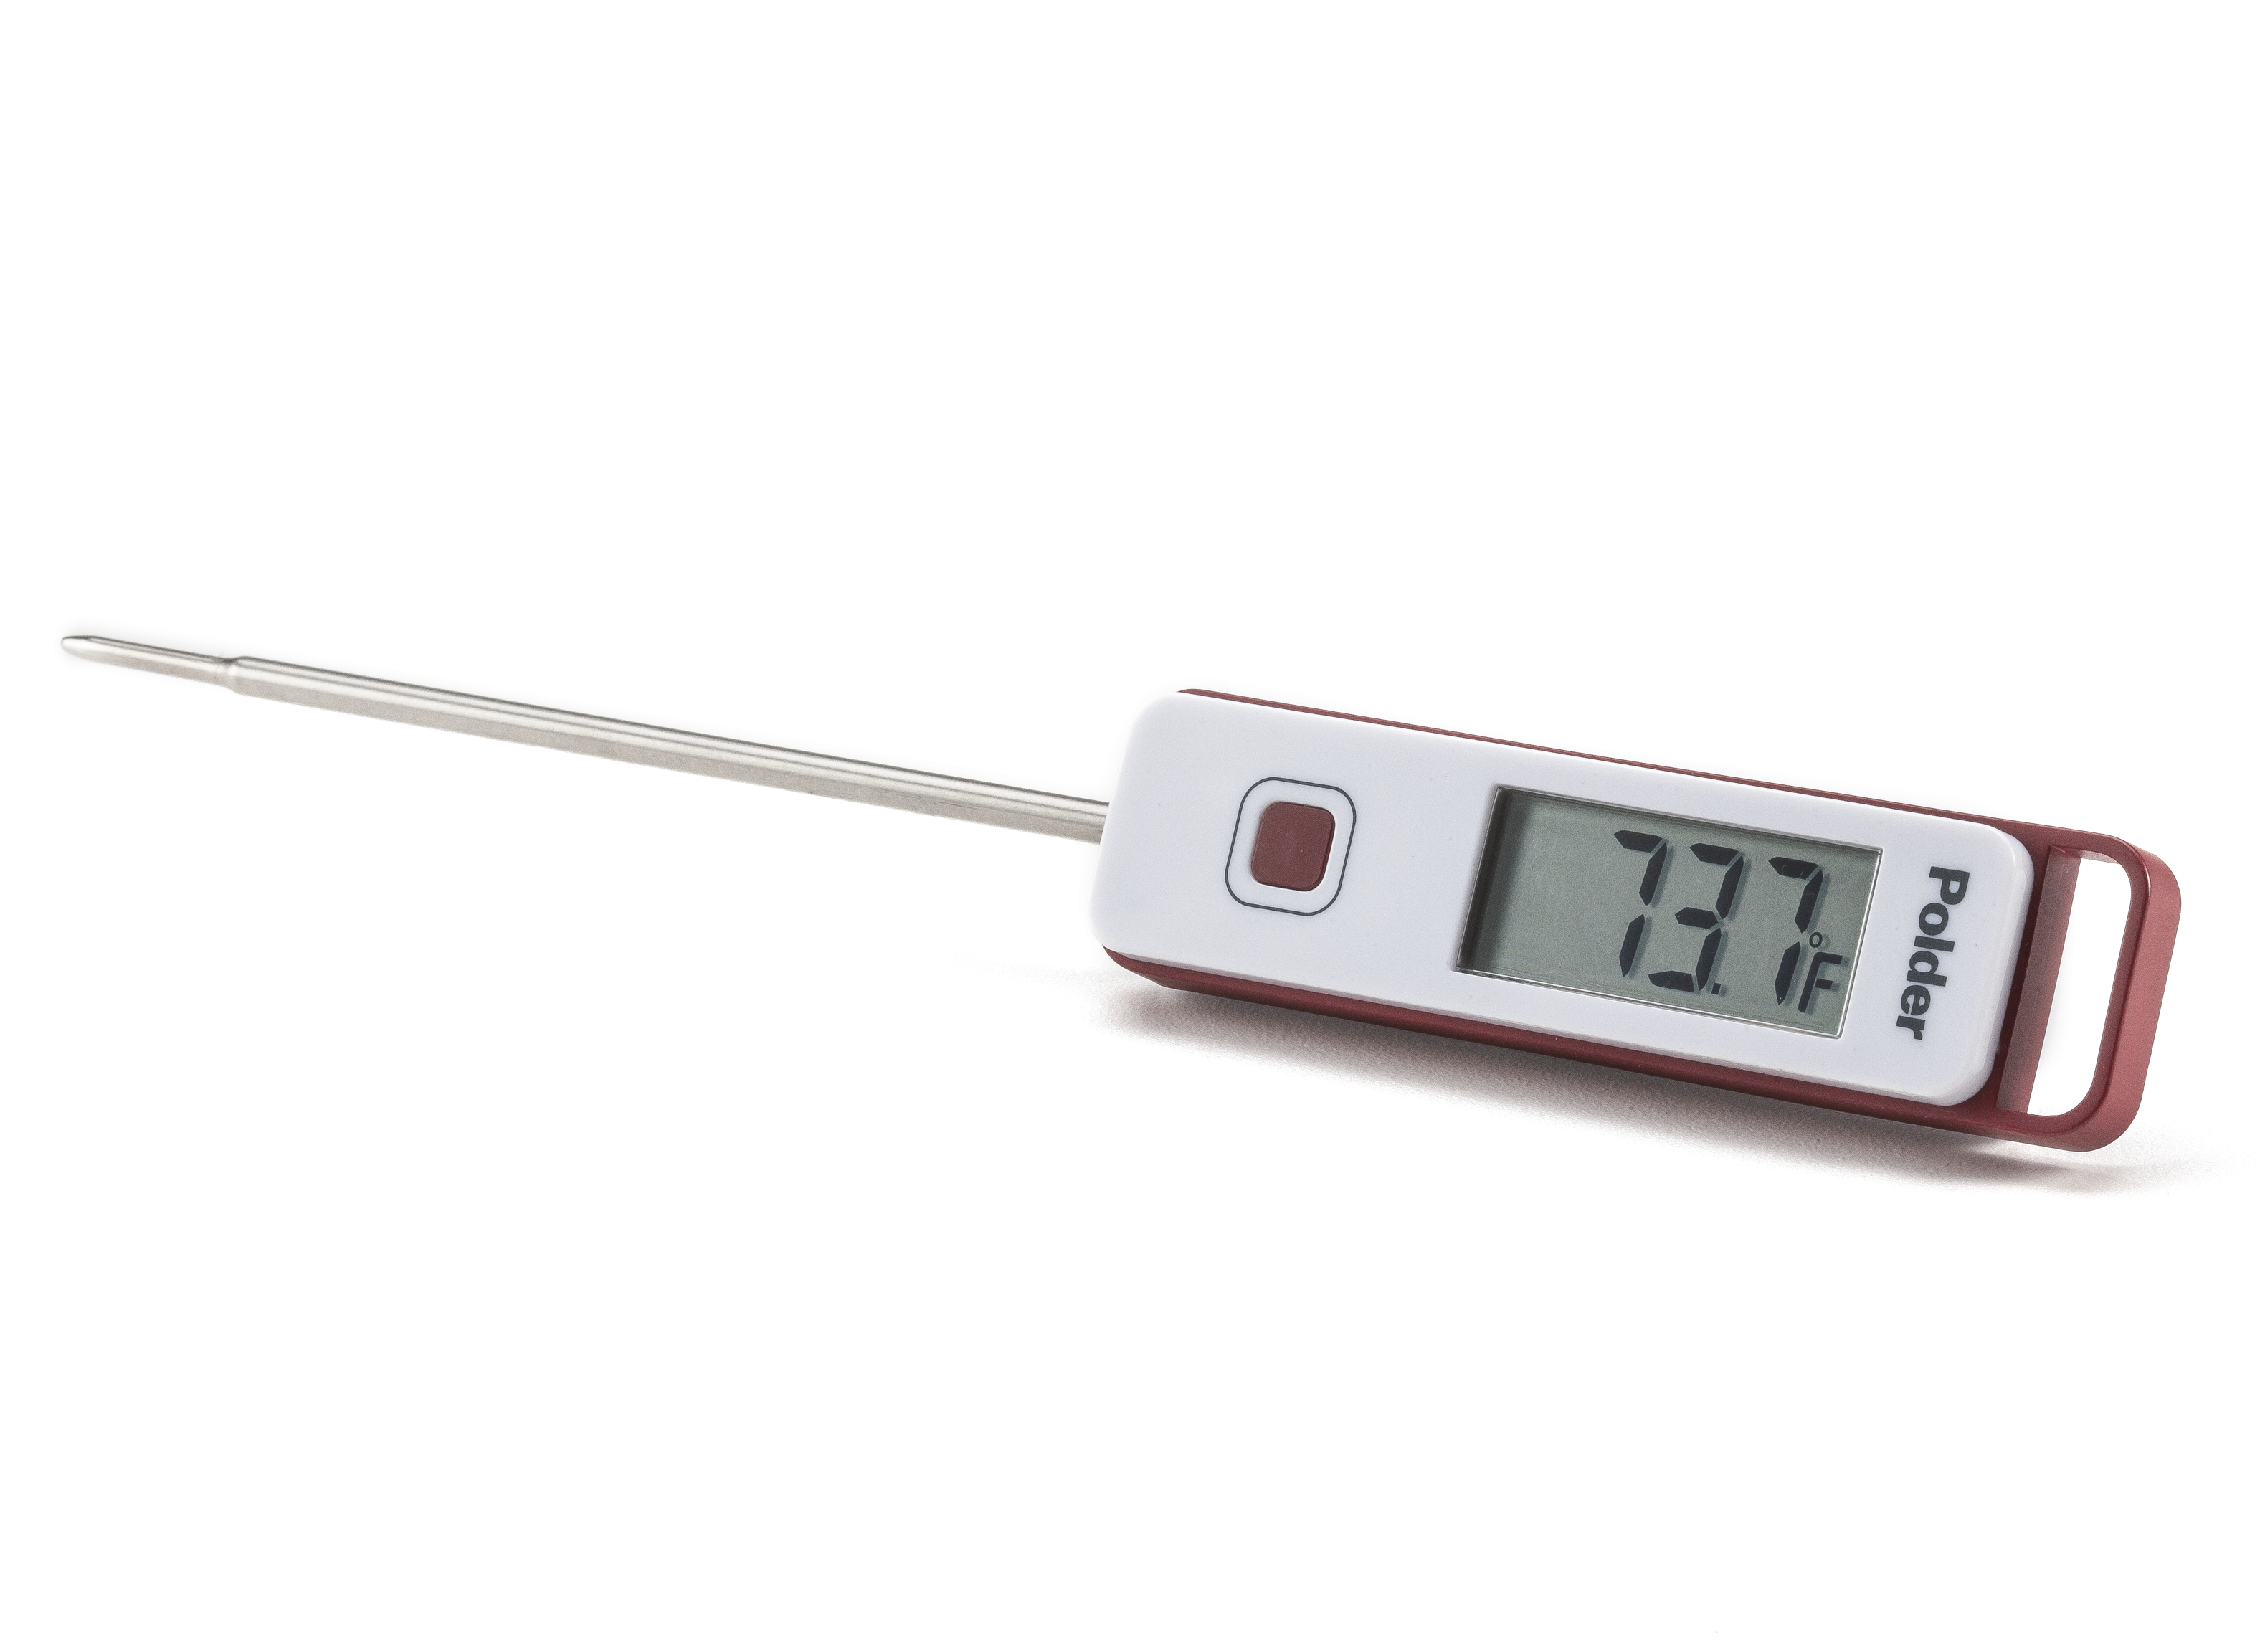 https://crdms.images.consumerreports.org/prod/products/cr/models/246608-meatthermometers-polder-stablereadthm379.png